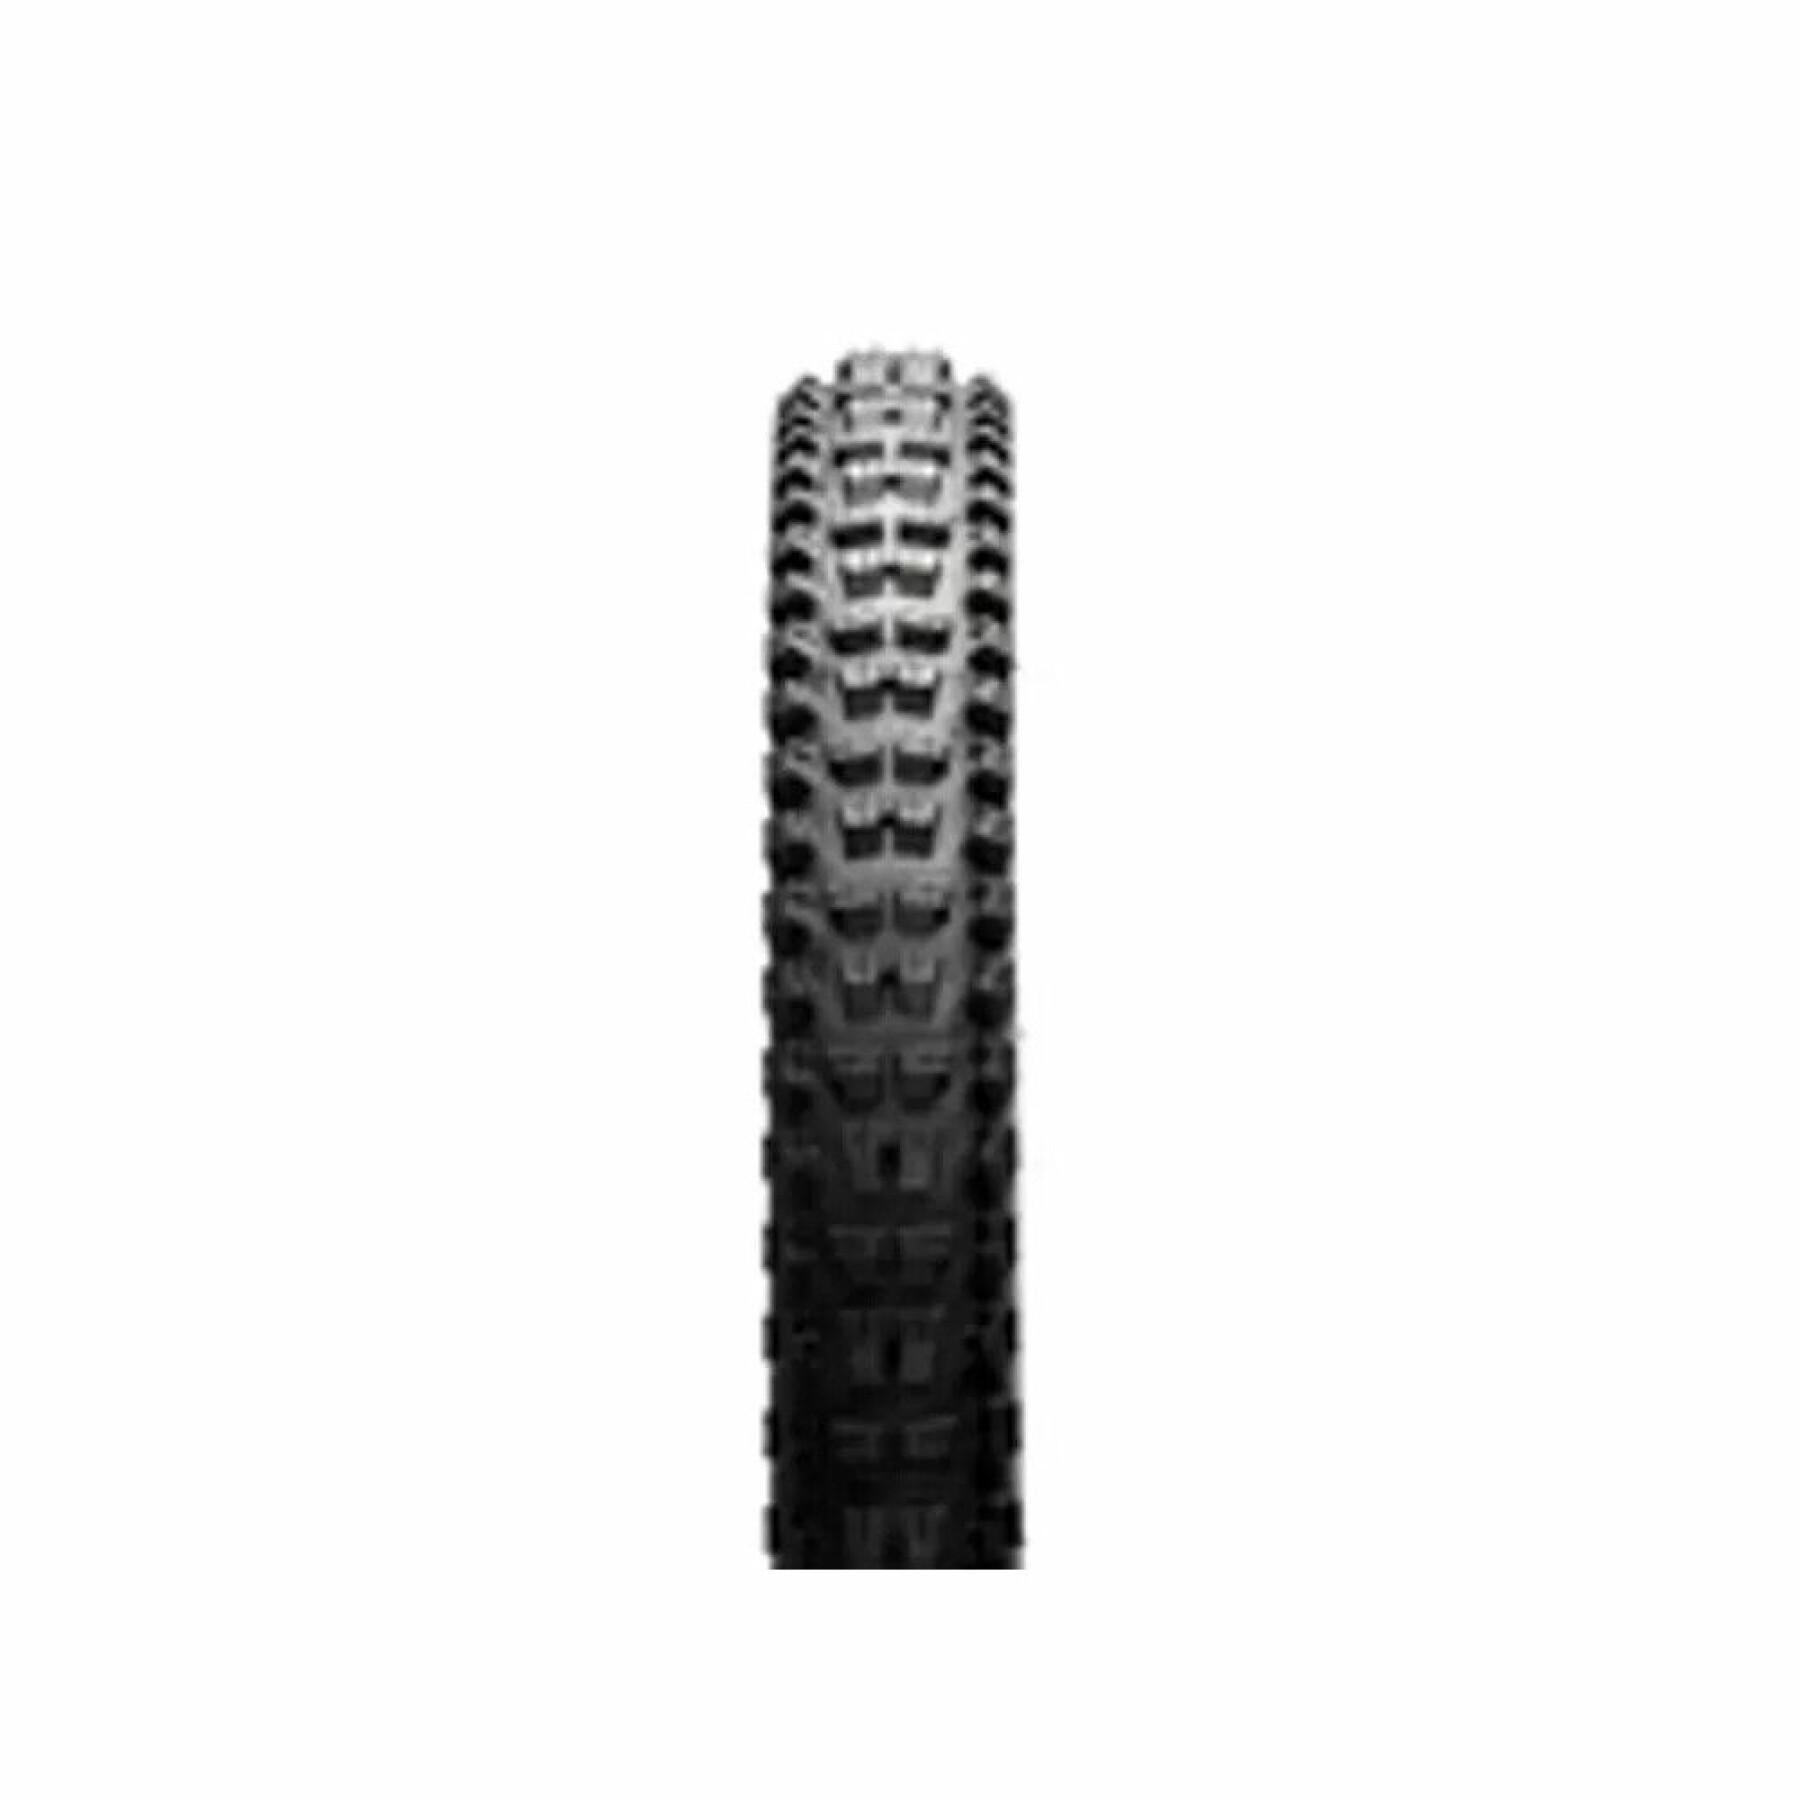 Tire Onza Aquila Skinwall GRC 120 TPI gomme, 50a/45a, 61-622, 1200g